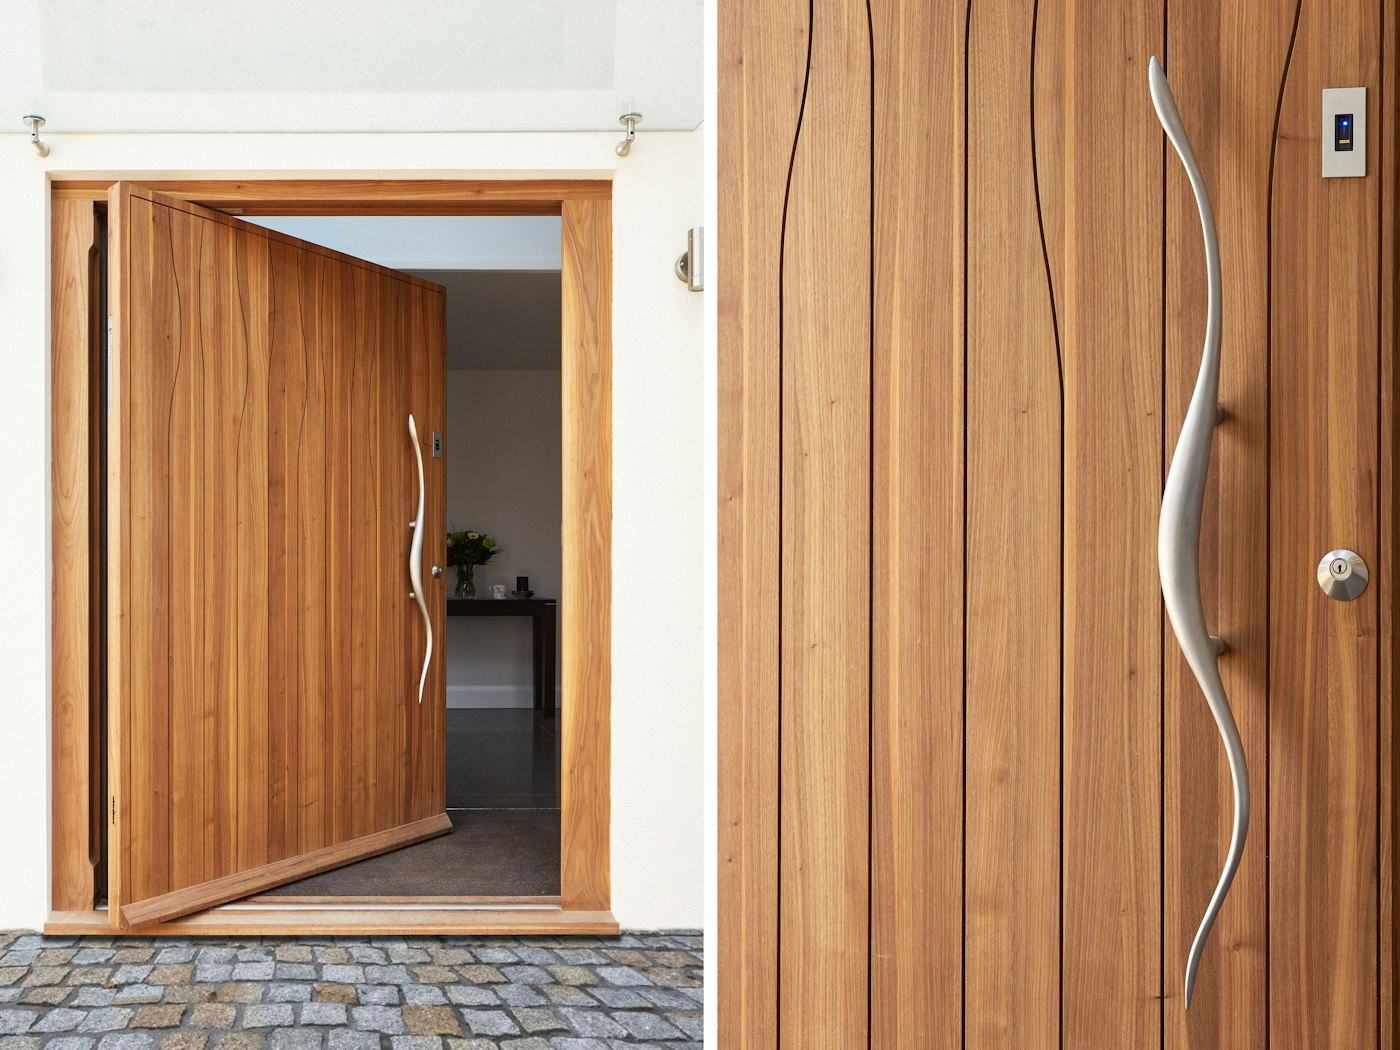 Our Wav design door takes centre stage in this house